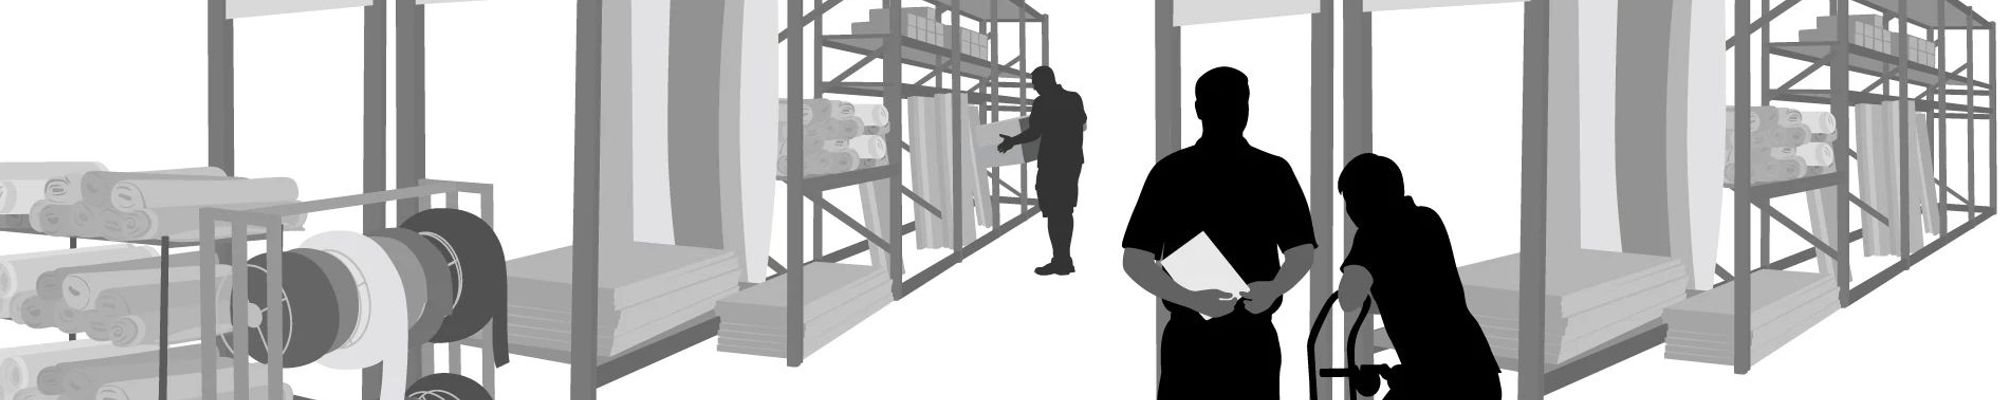 Grayscale graphic of employees in a warehouse from Flooring Now in Manassas, VA